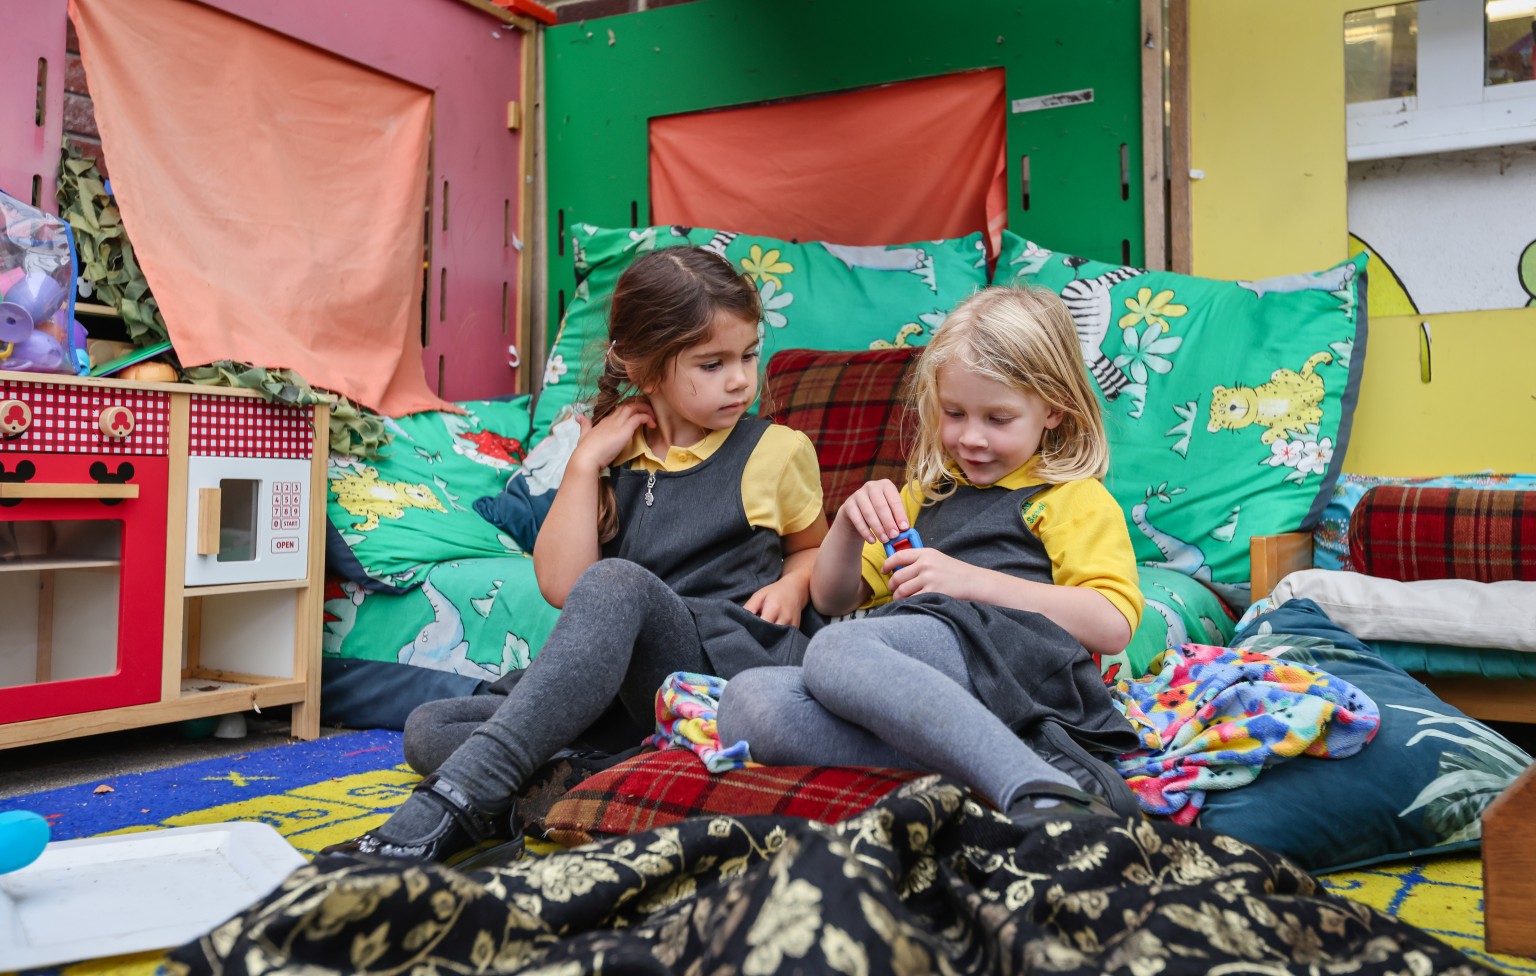 Pupils in the cosy corner of their classroom